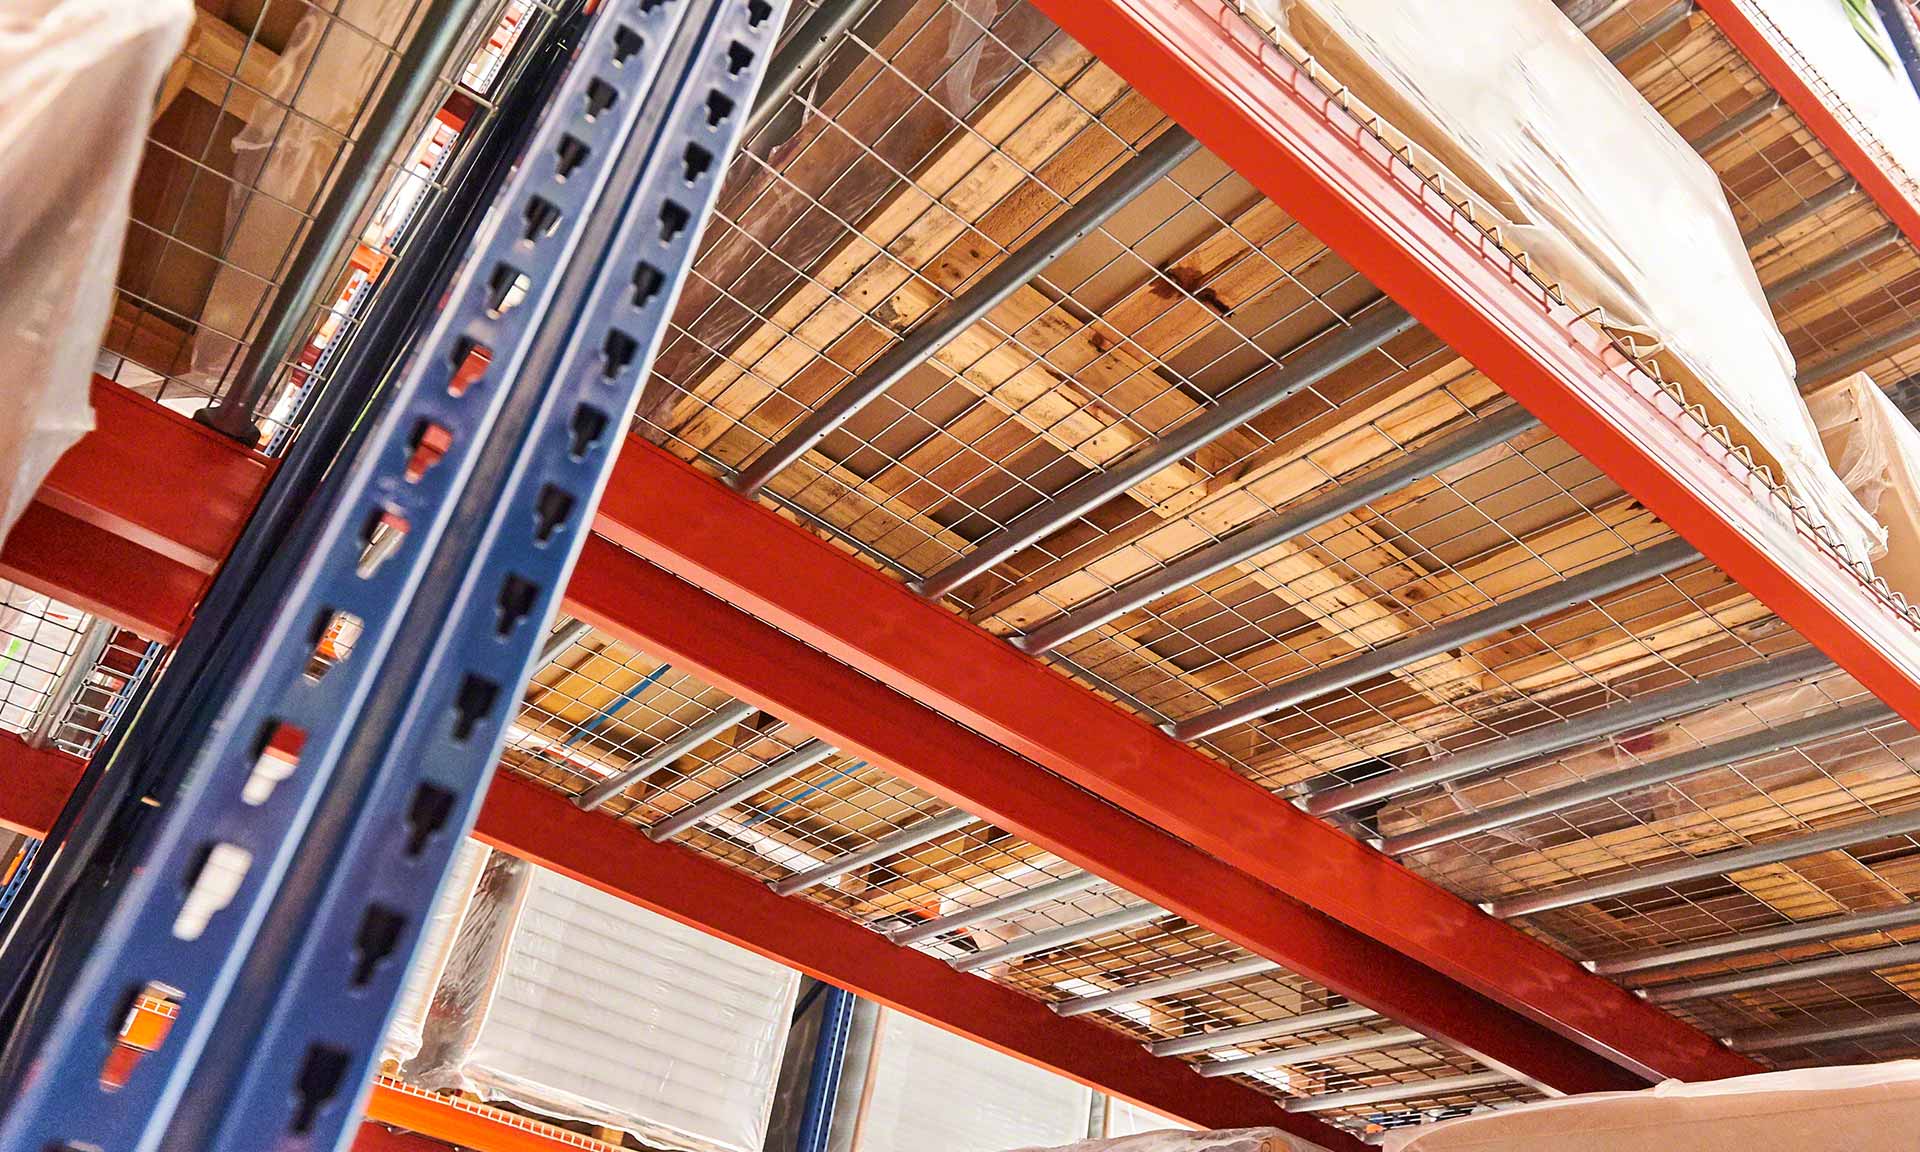 New warehouse of 3PL provider Codognotto with earthquake-proof pallet racking